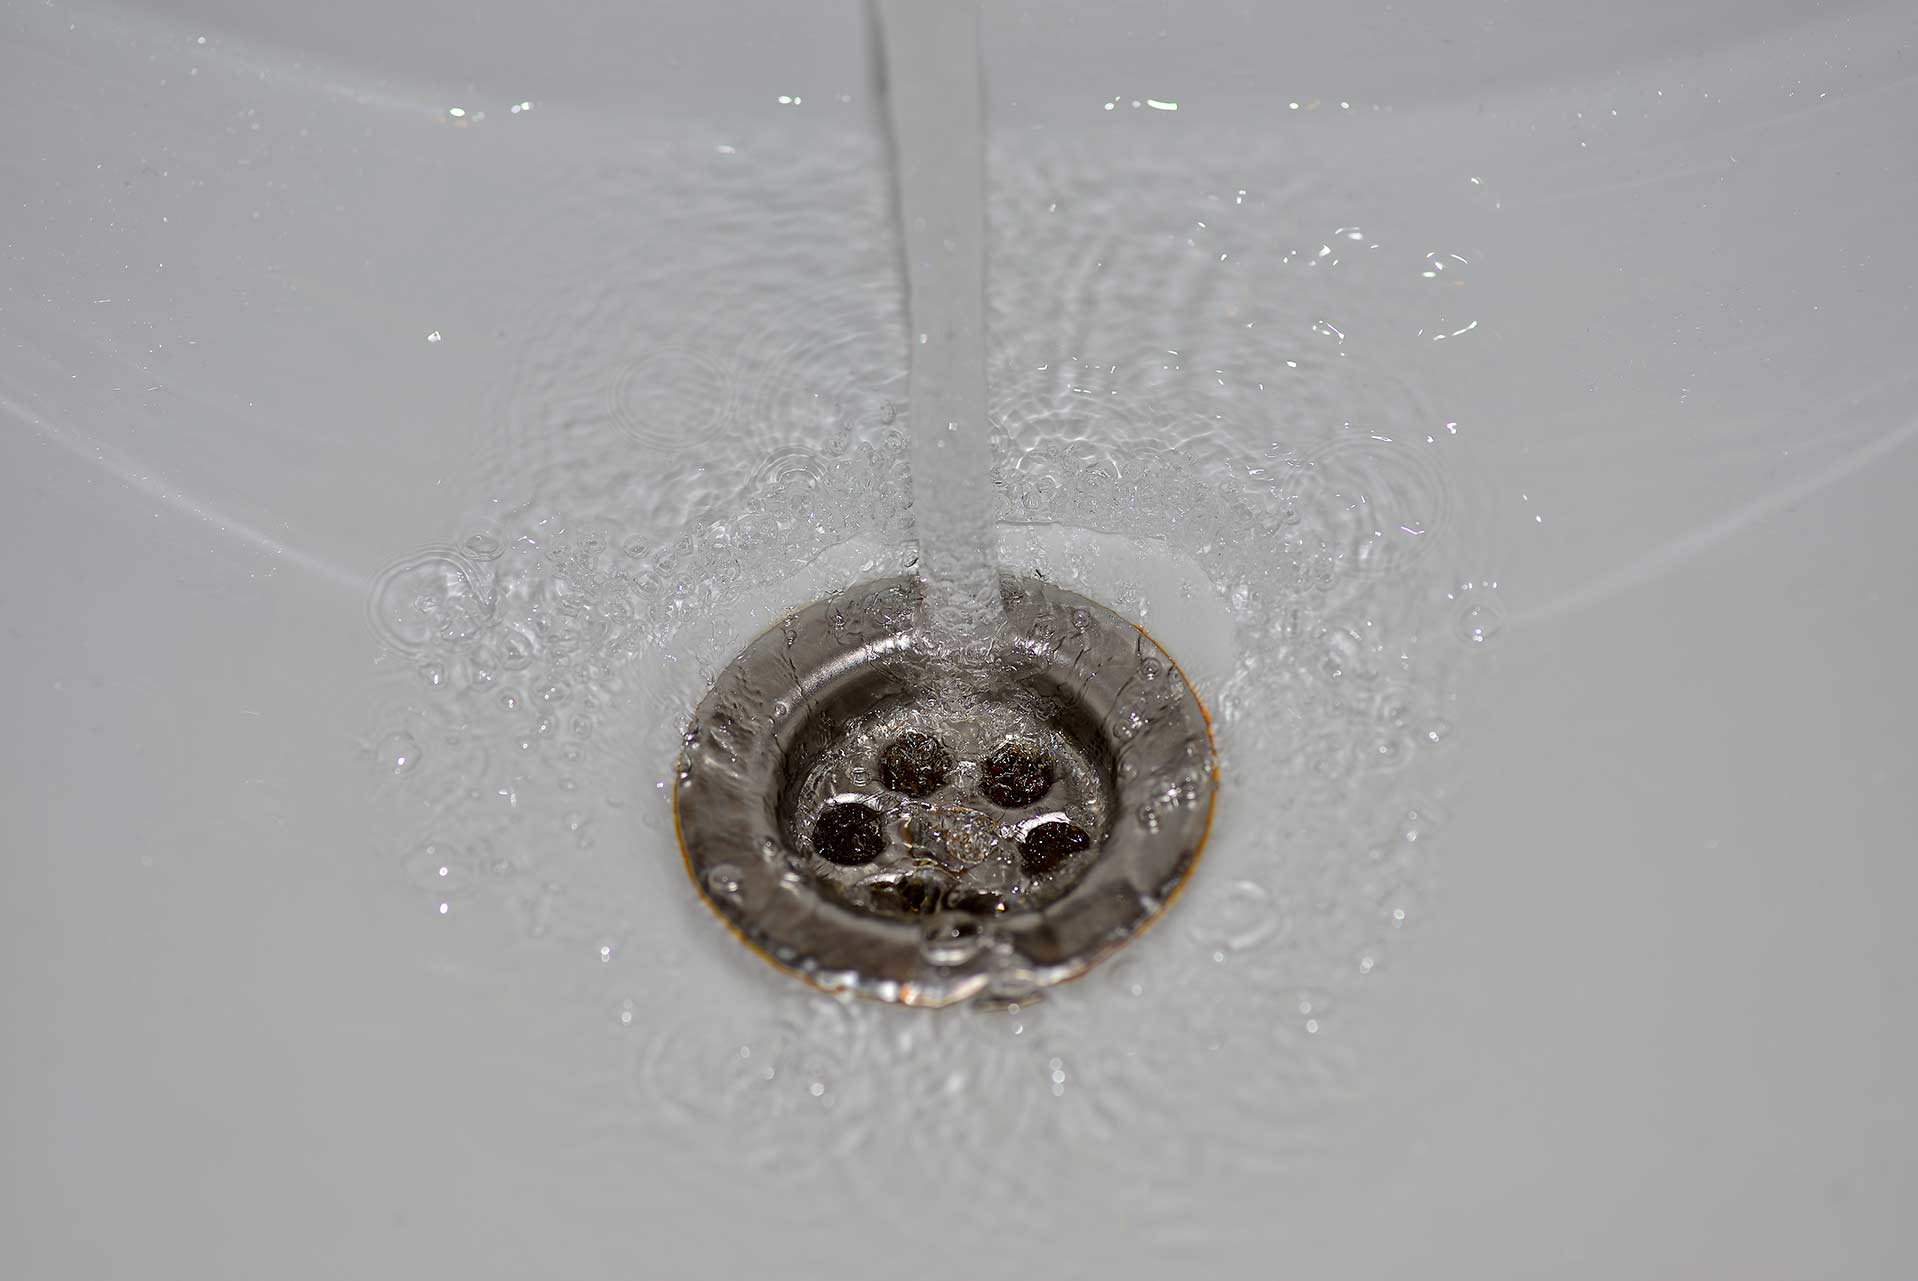 A2B Drains provides services to unblock blocked sinks and drains for properties in Aberystwyth.